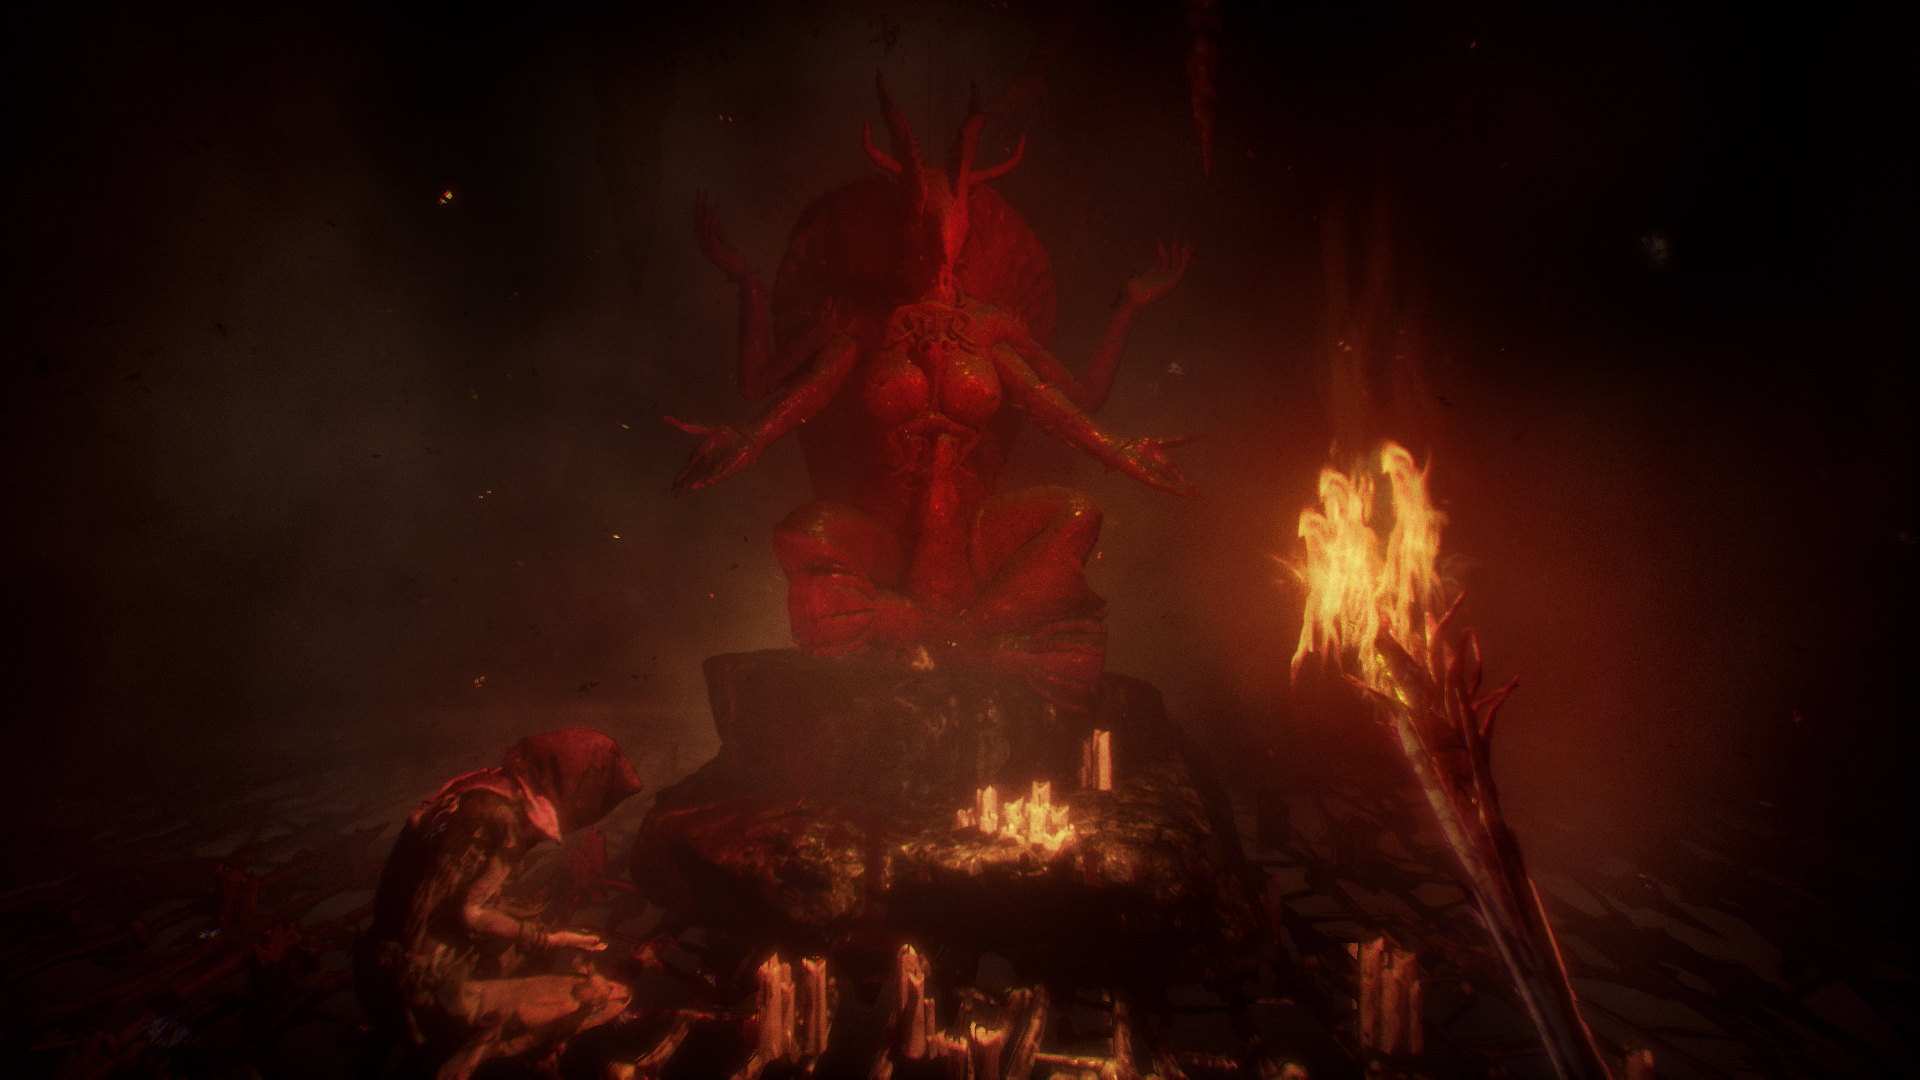 Agony demon welcomes you hell